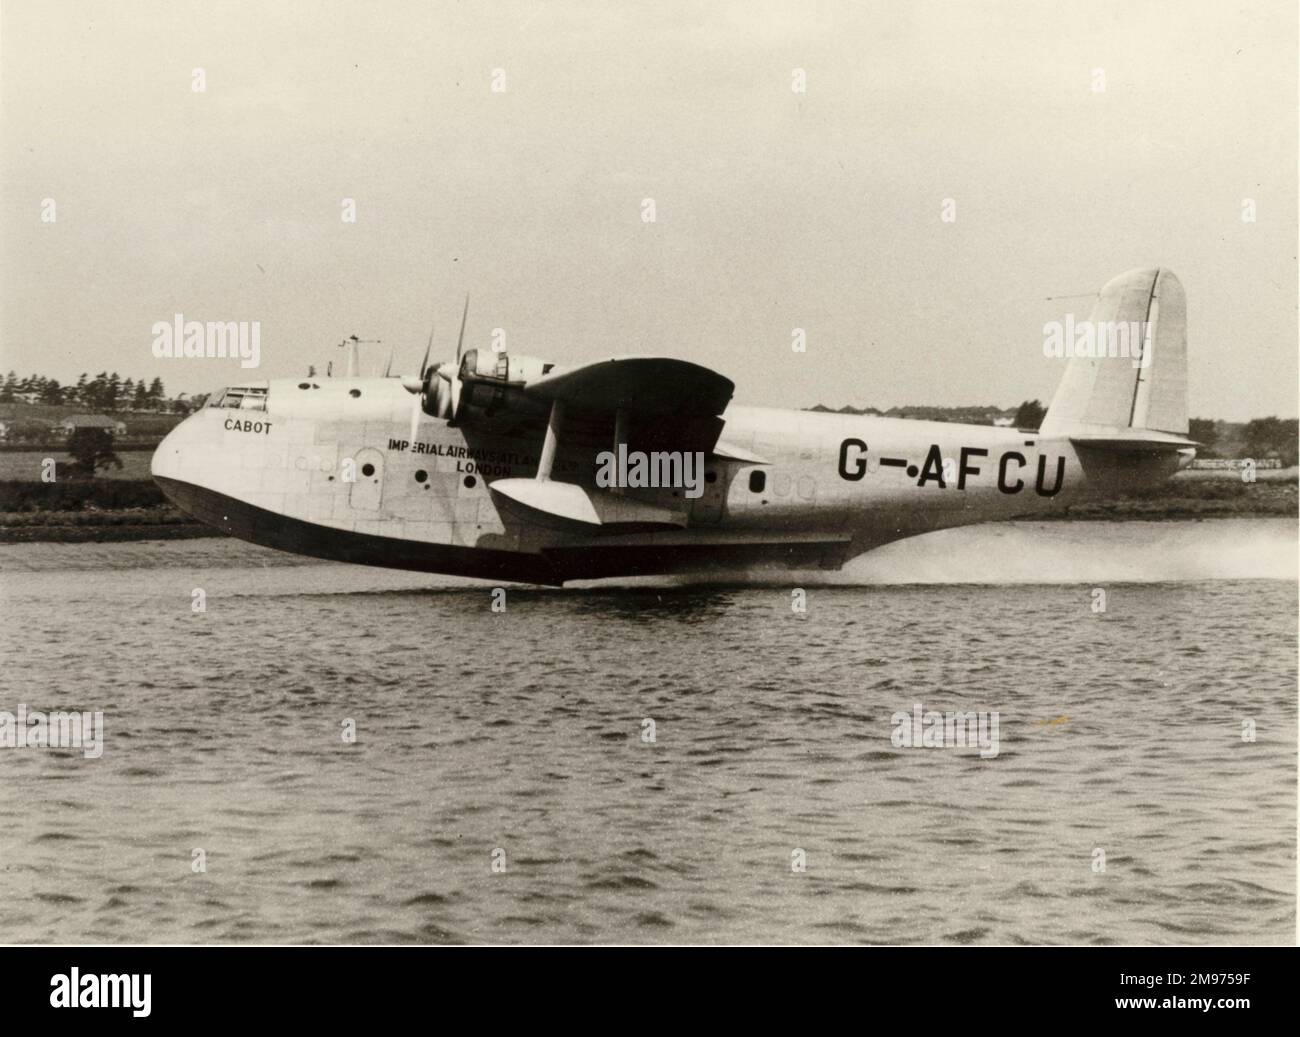 Short S30 Empire Flying Boat, G-AFCU, Cabot. Stock Photo